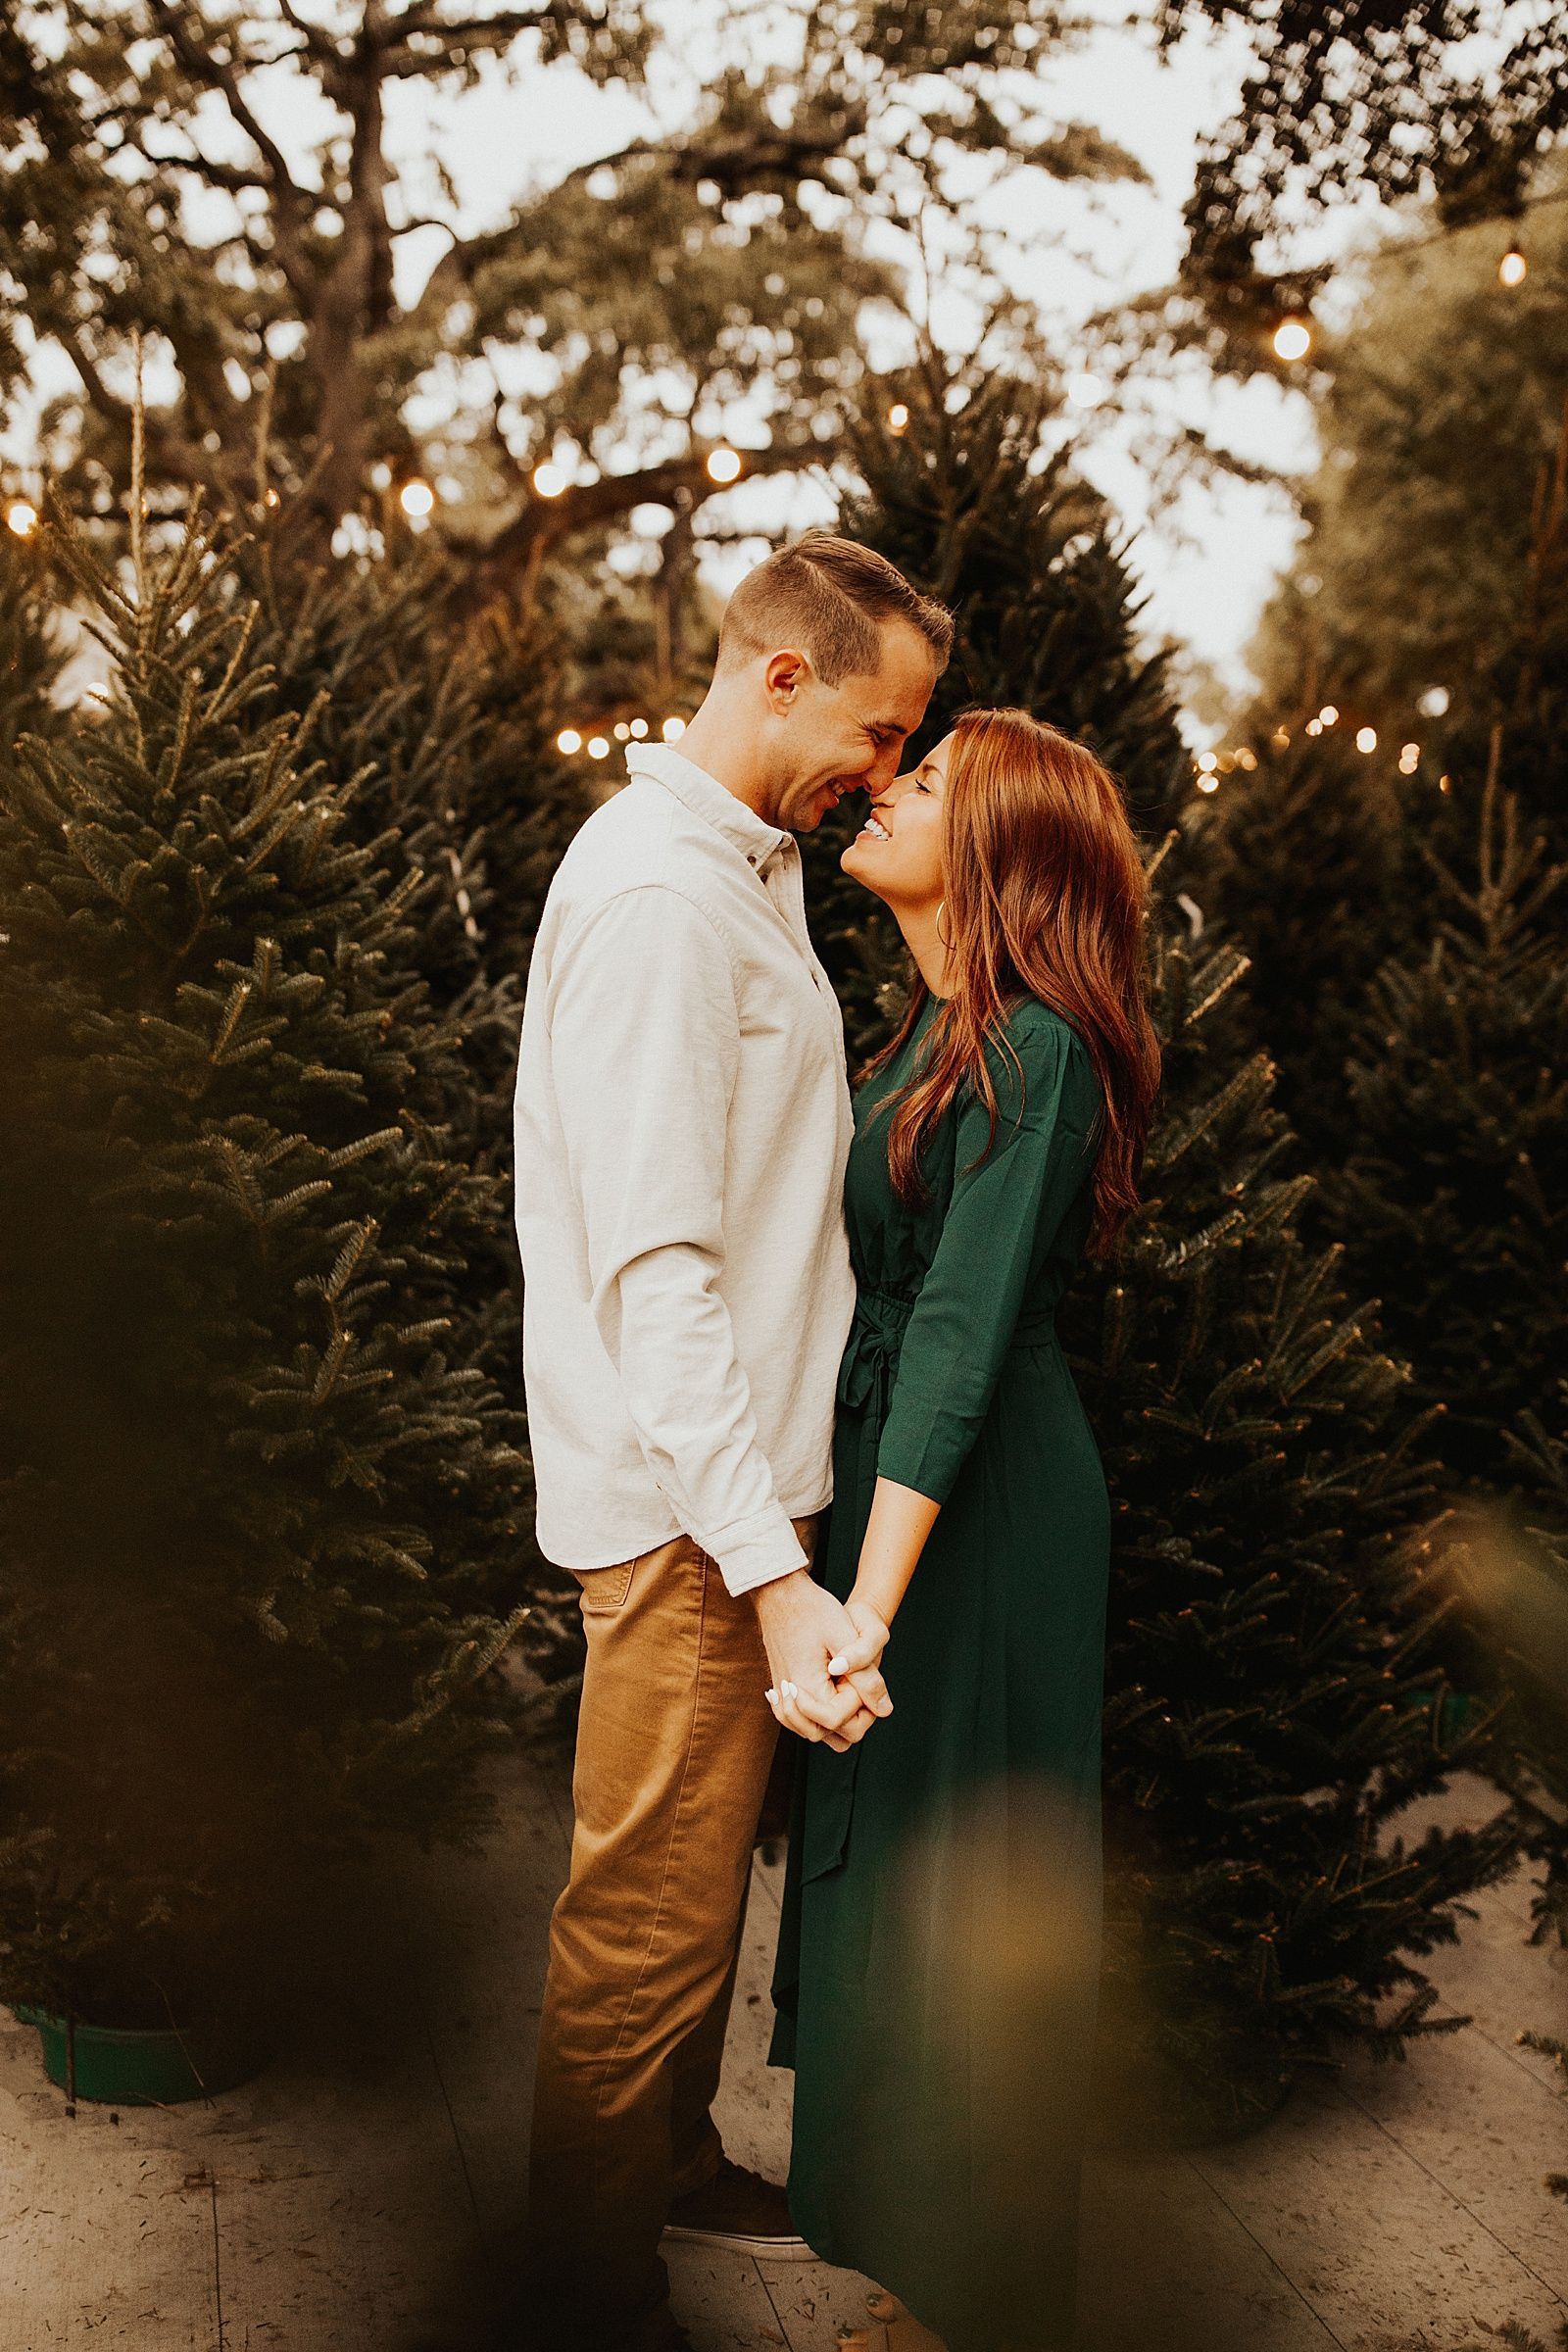 Cozy and Romantic Christmas Engagement Photos in Austin, TX -   17 christmas photoshoot couples outfits ideas